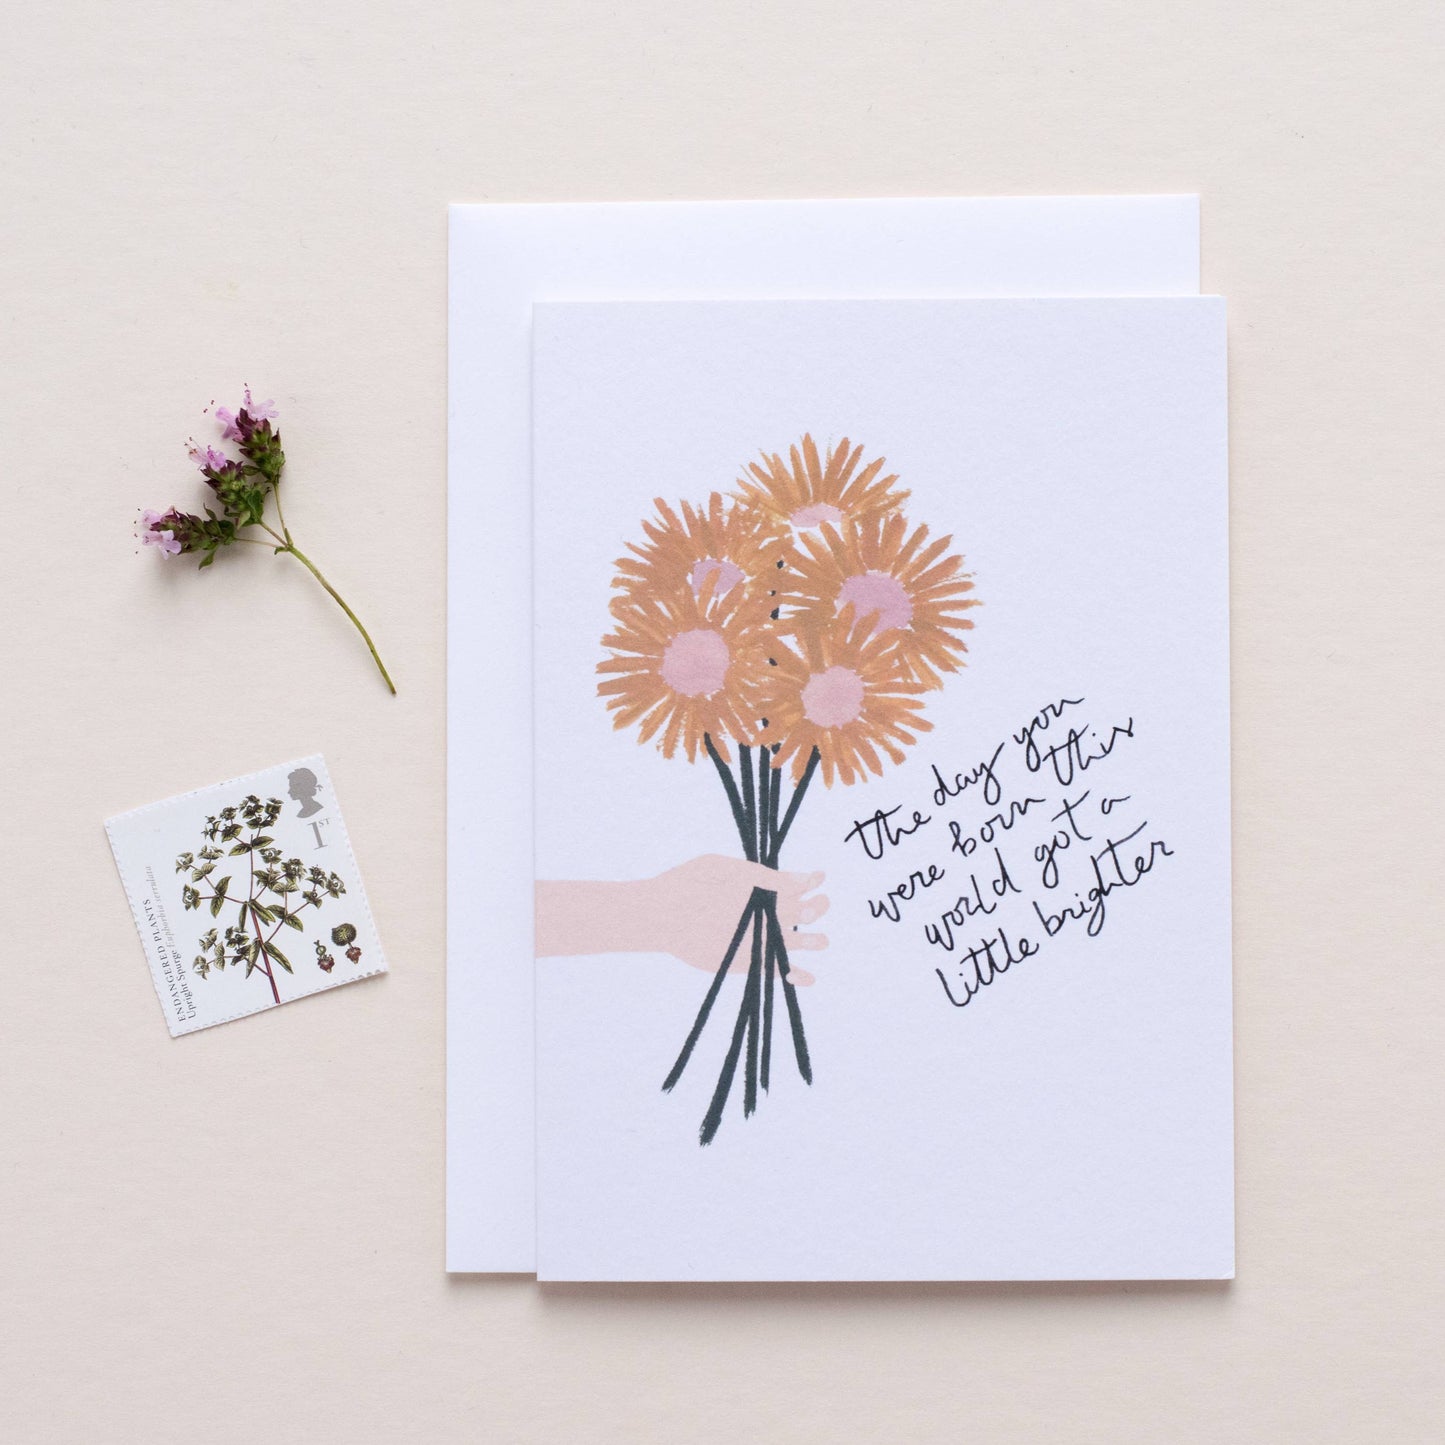 Little Brighter Greeting Card